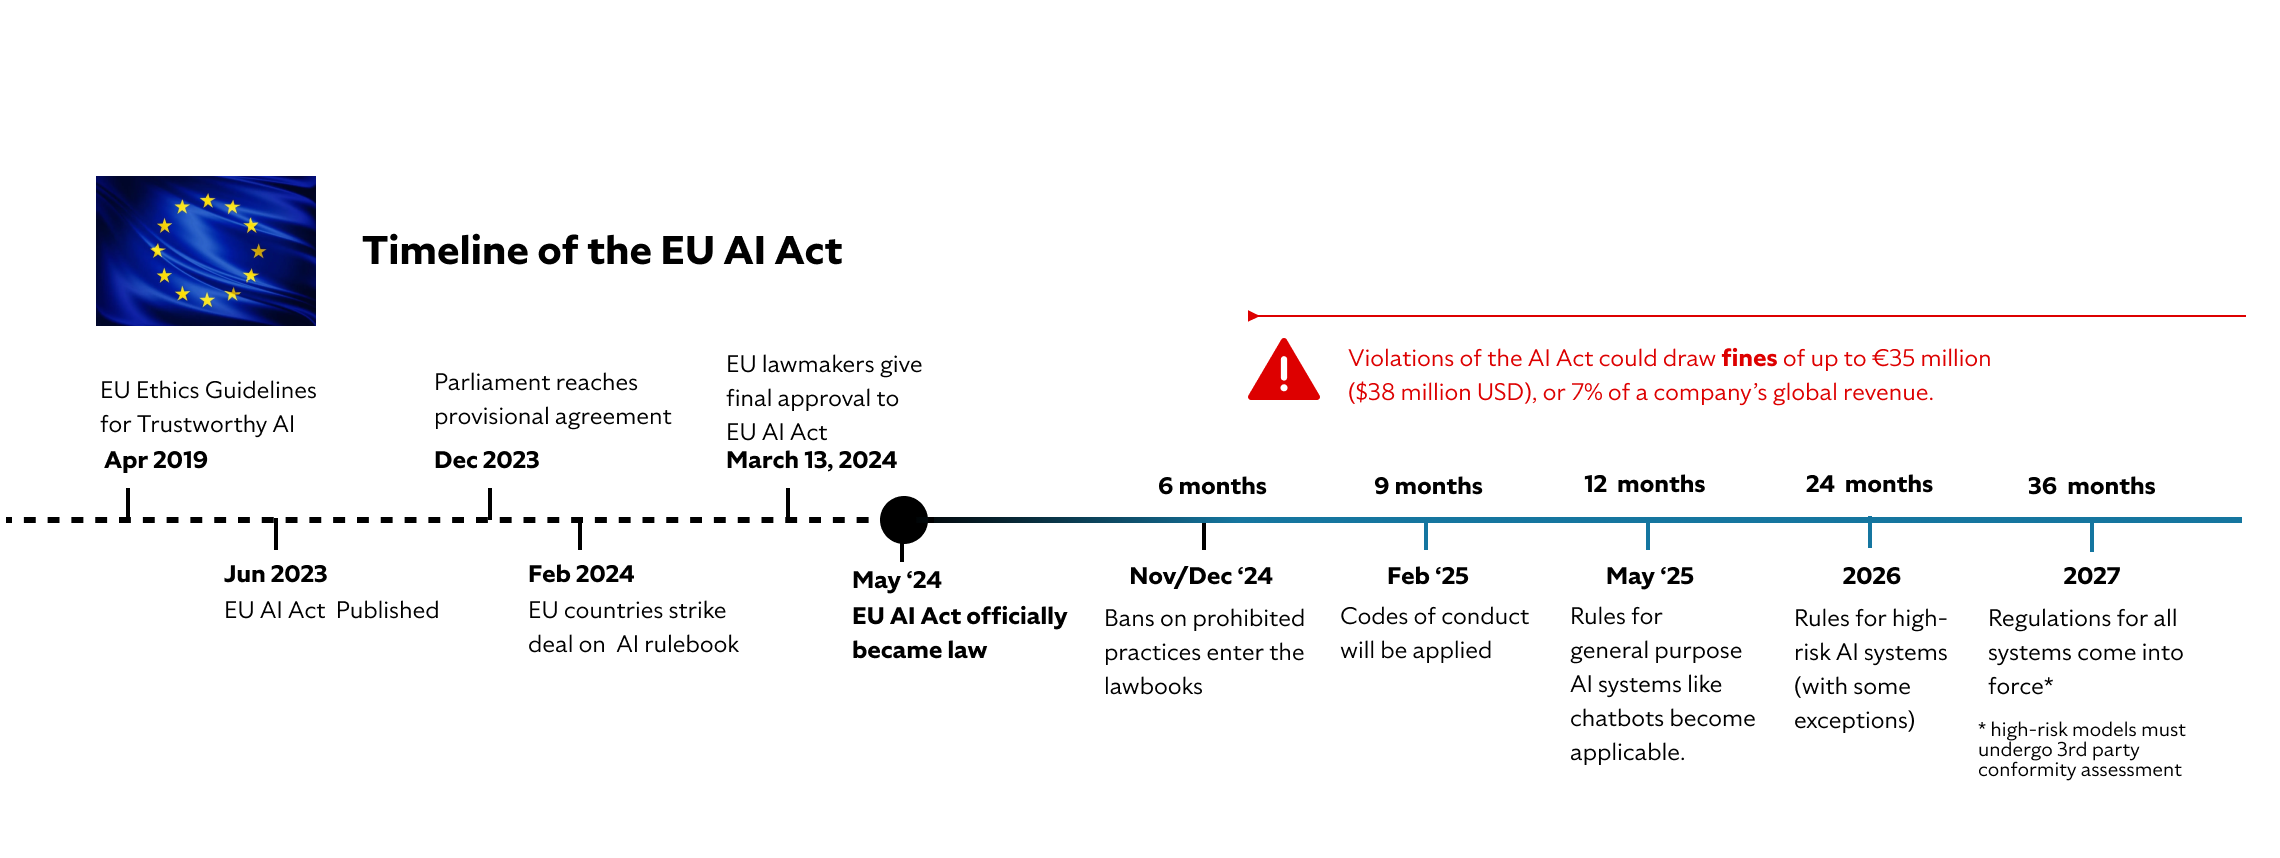 Timeline of the EU AI Act - June 18 - 2024